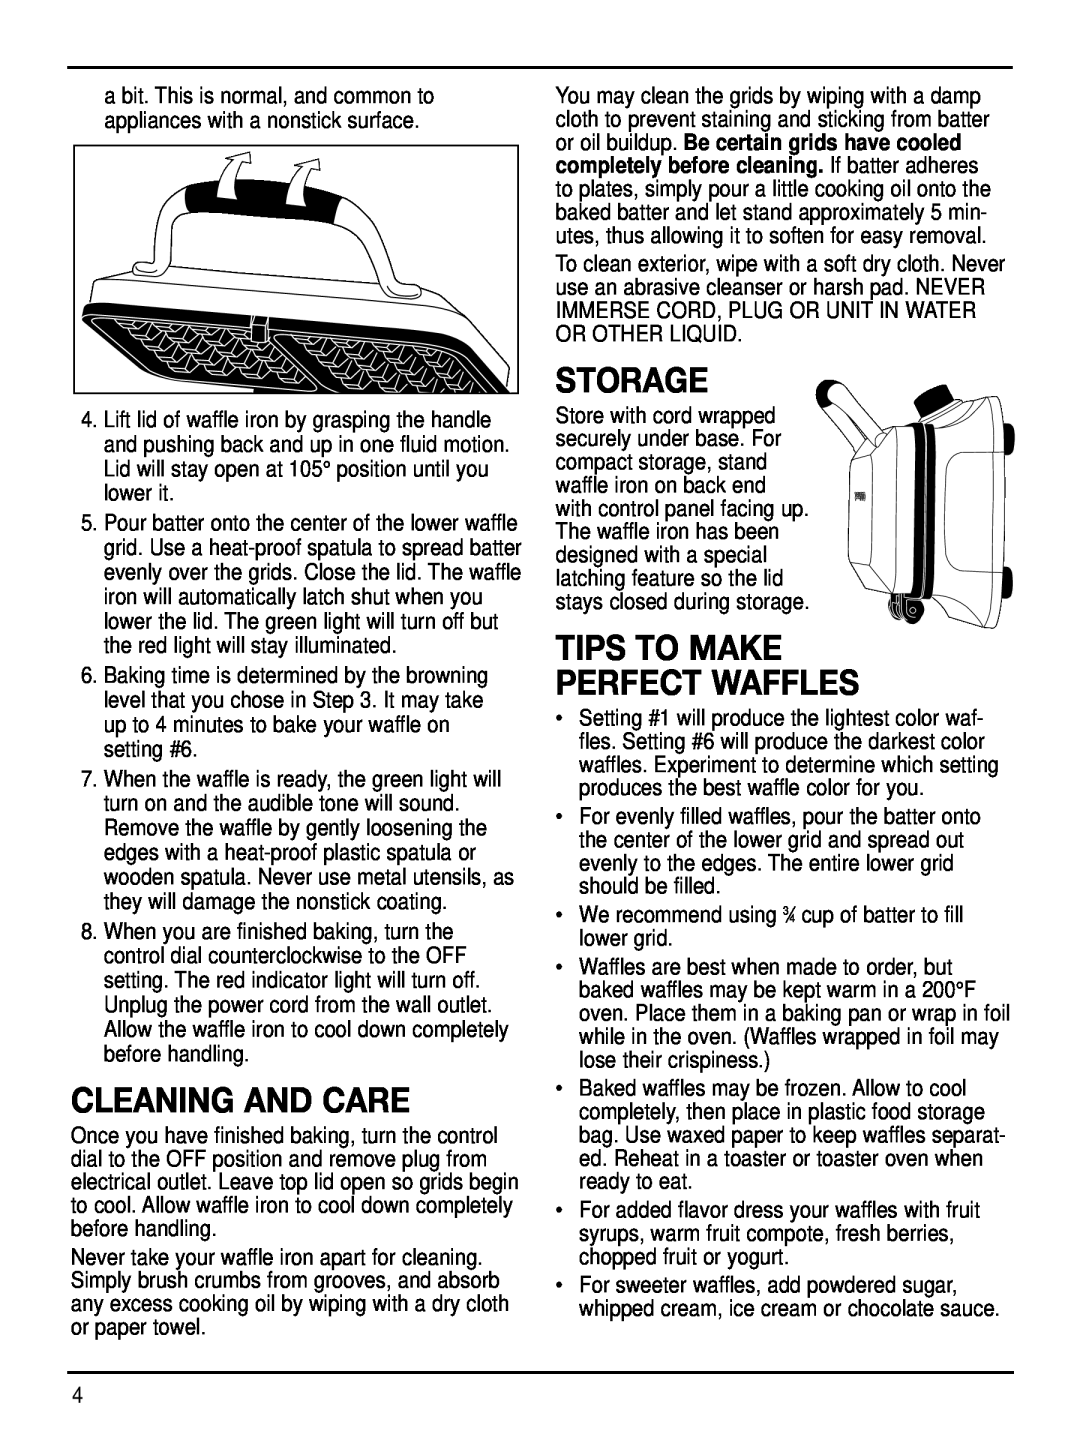 Cuisinart WAF-2B manual Cleaning And Care, Storage, Tips To Make Perfect Waffles 